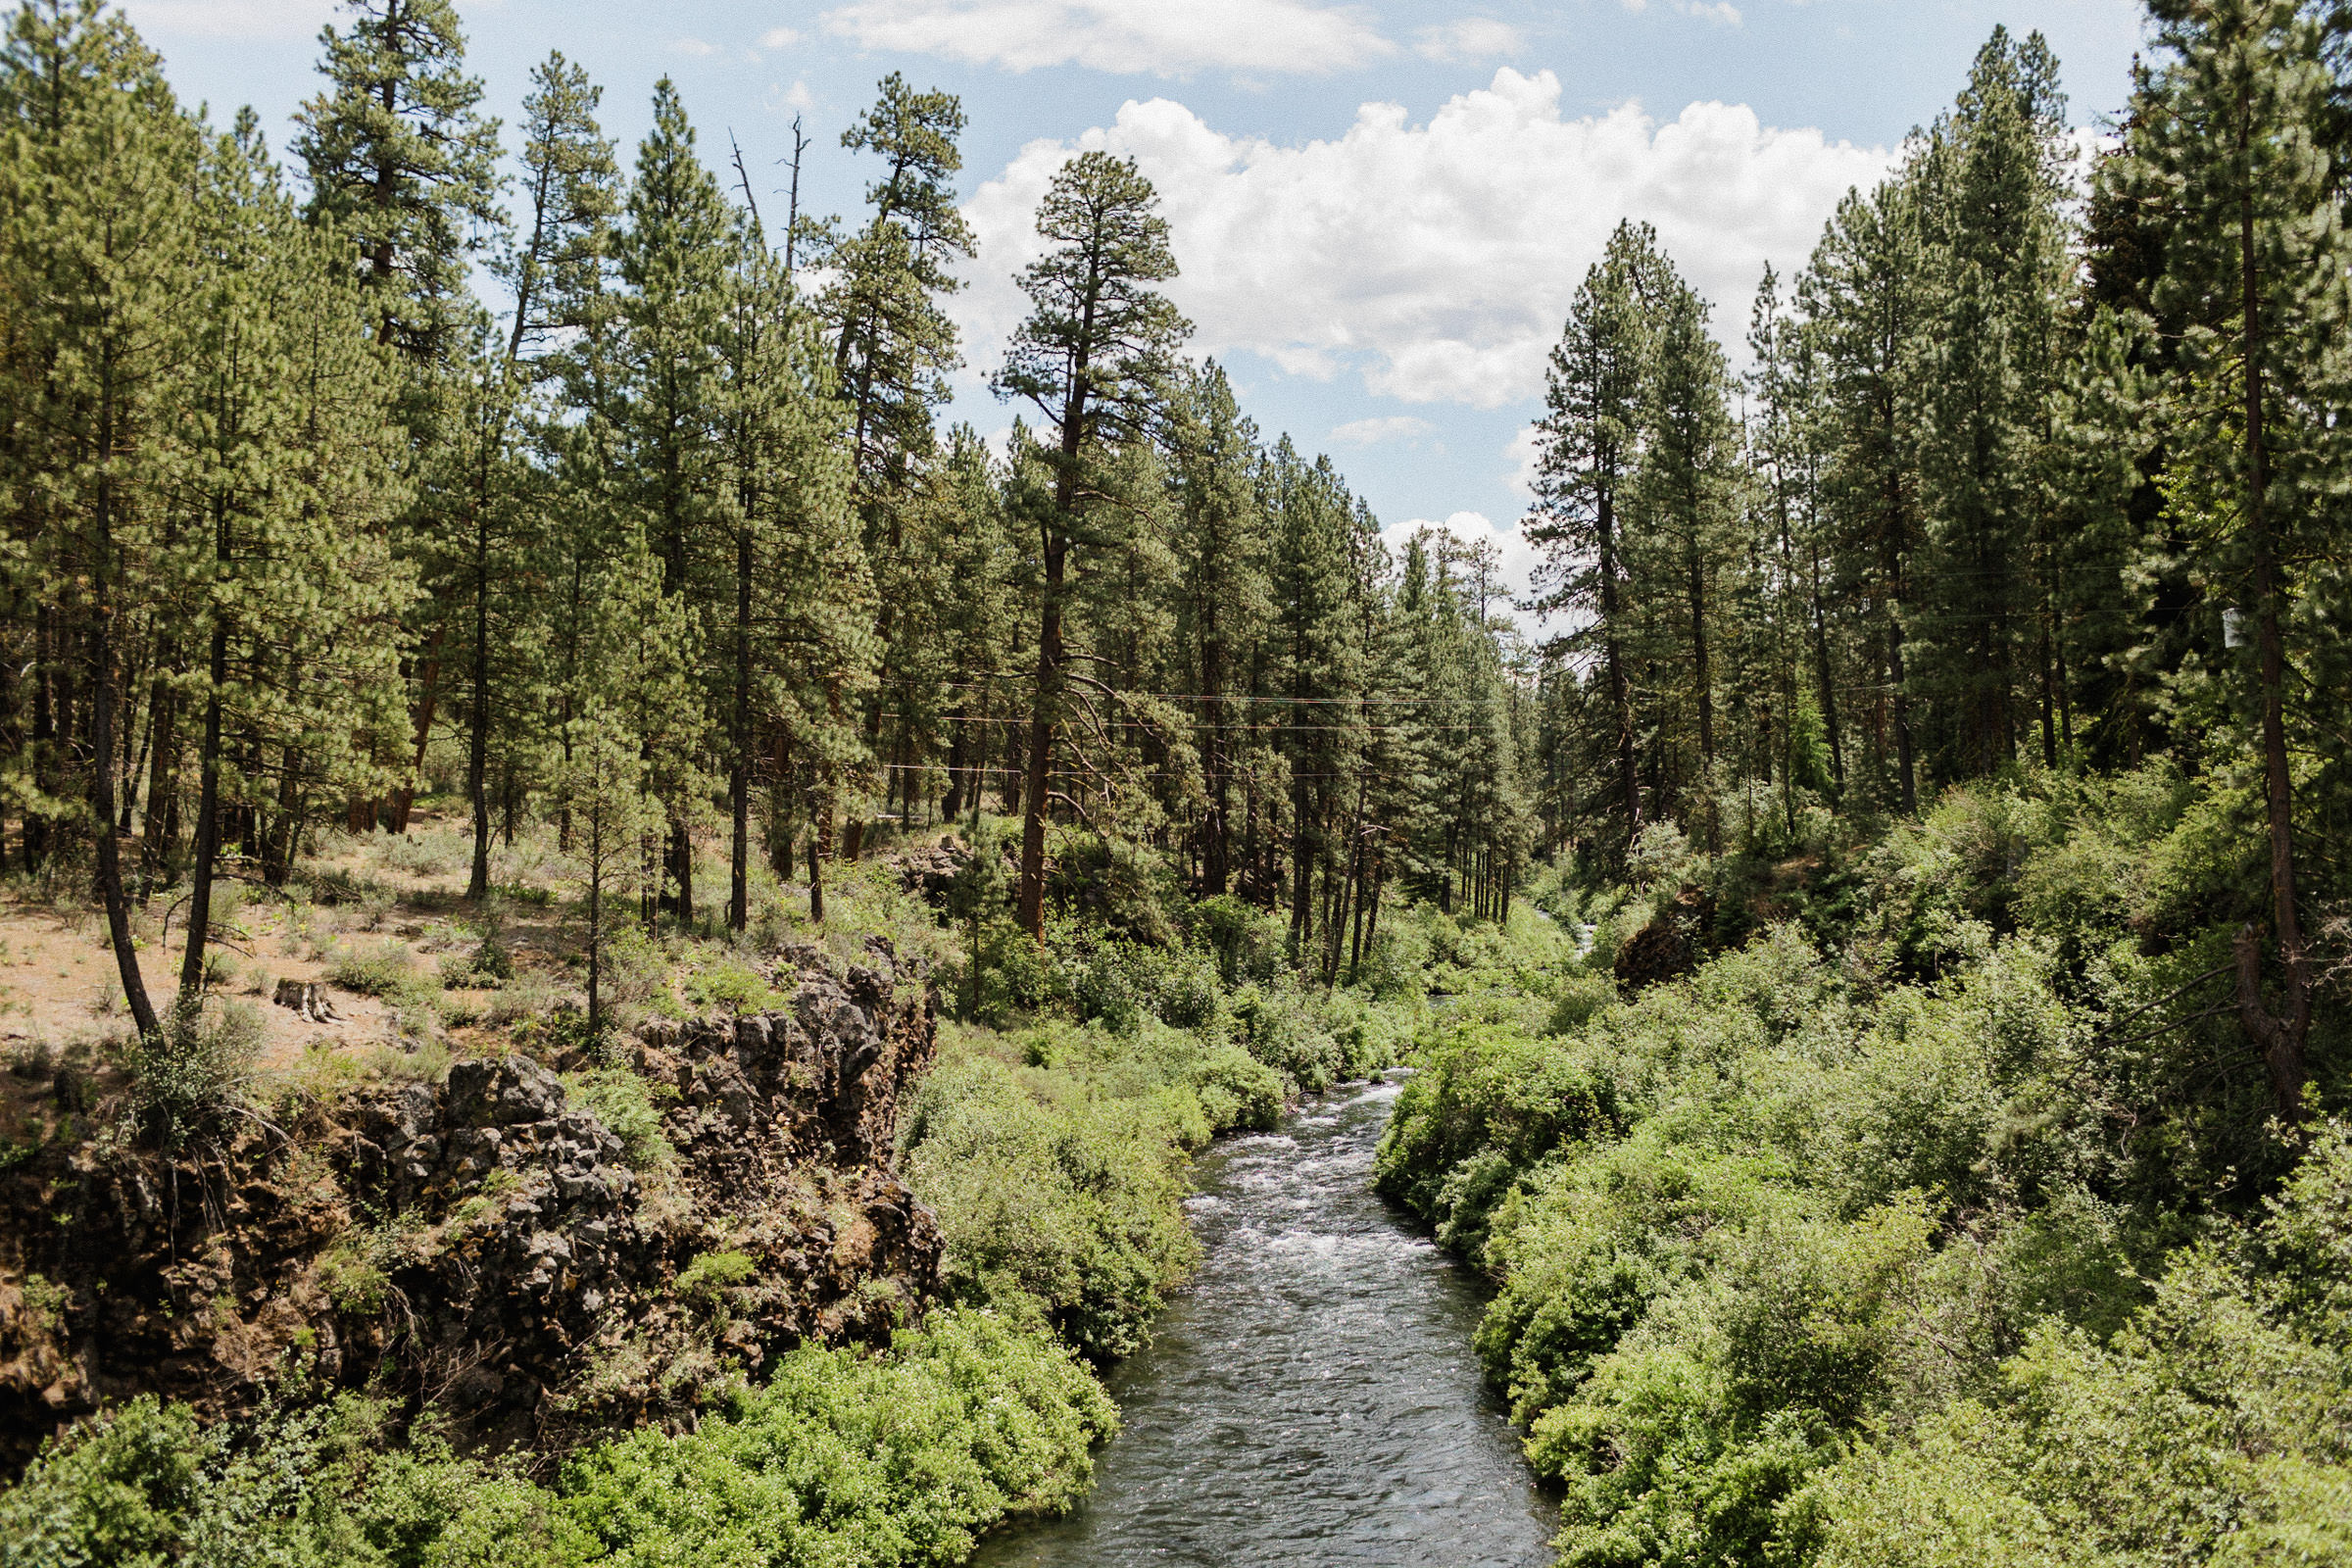 The Metolius River flows through a forest